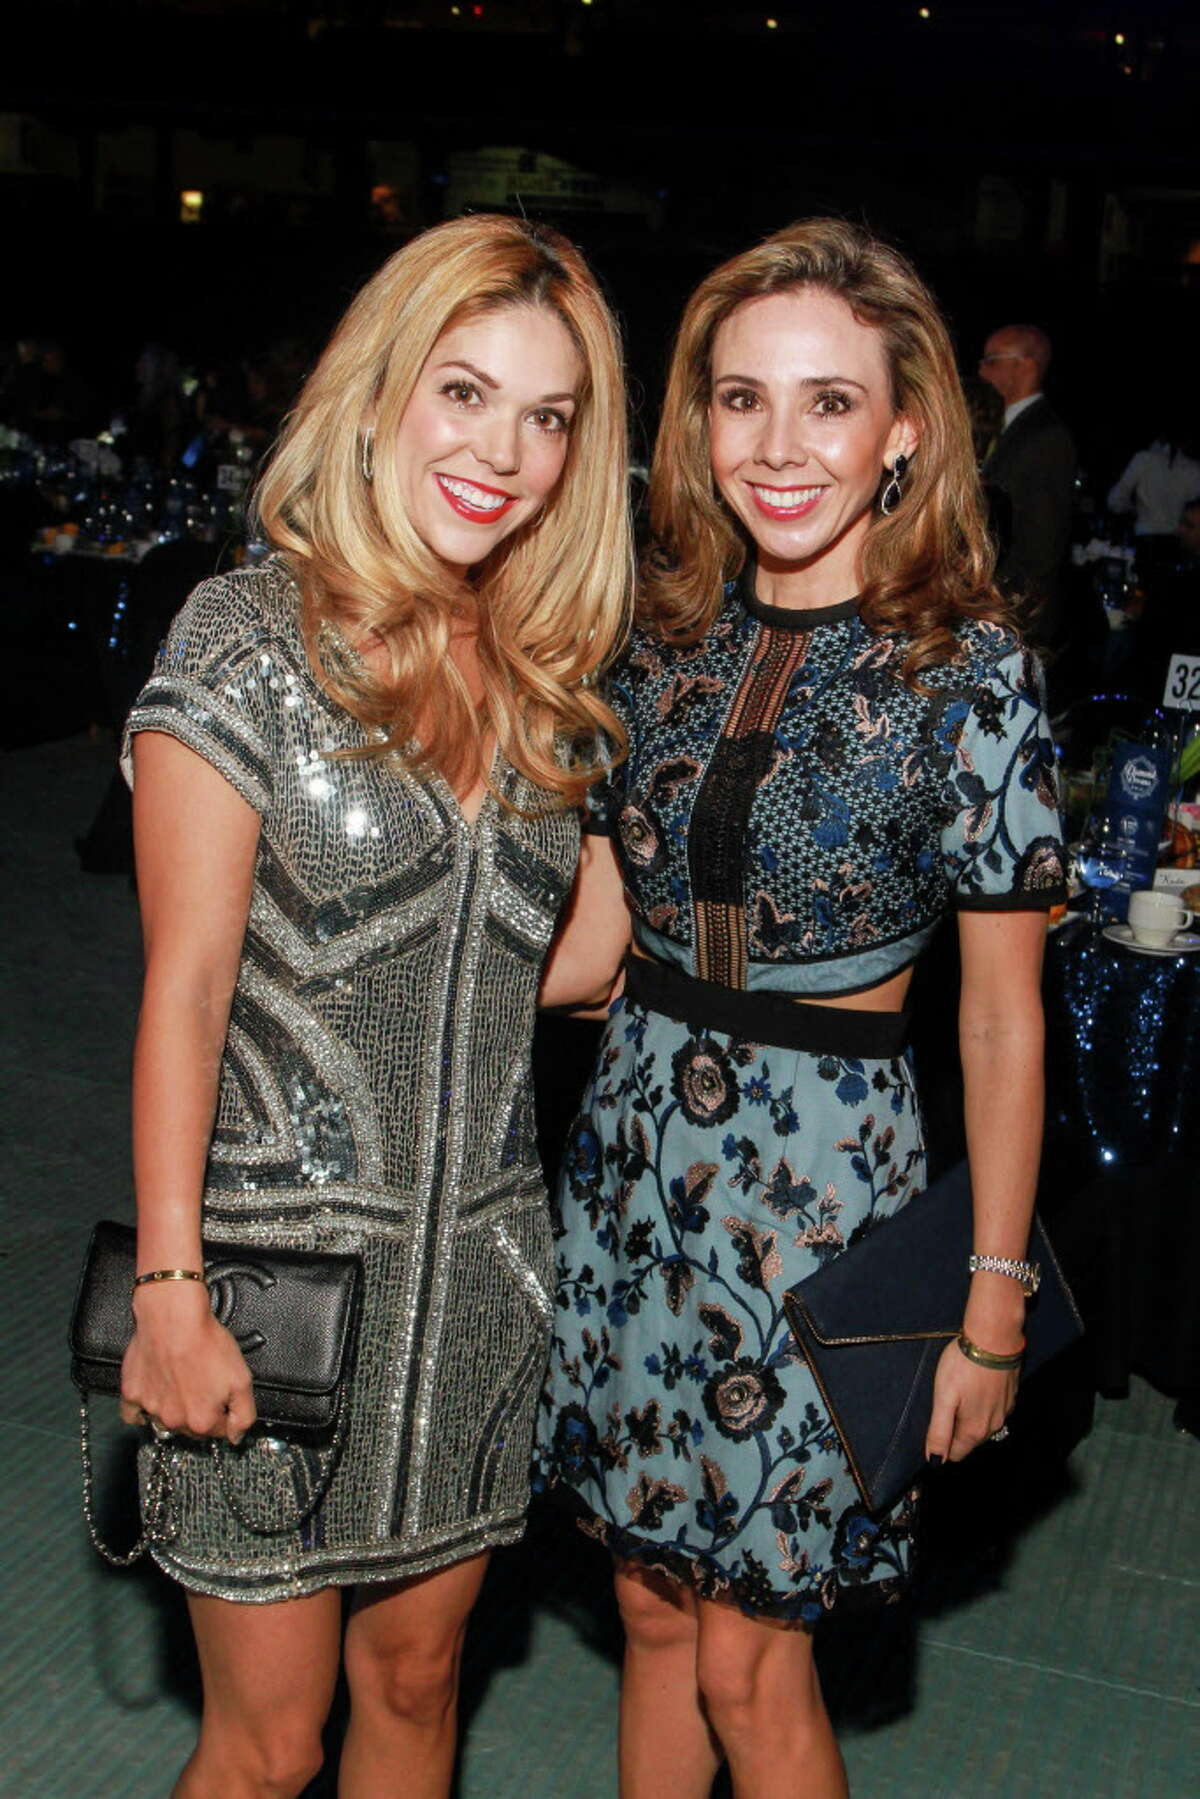 Veronica Massiatte, left, and Maria Morales at the Houston Astros Foundation's second annual "Diamond Dreams" gala. (For the Chronicle/Gary Fountain, January 20, 2017)